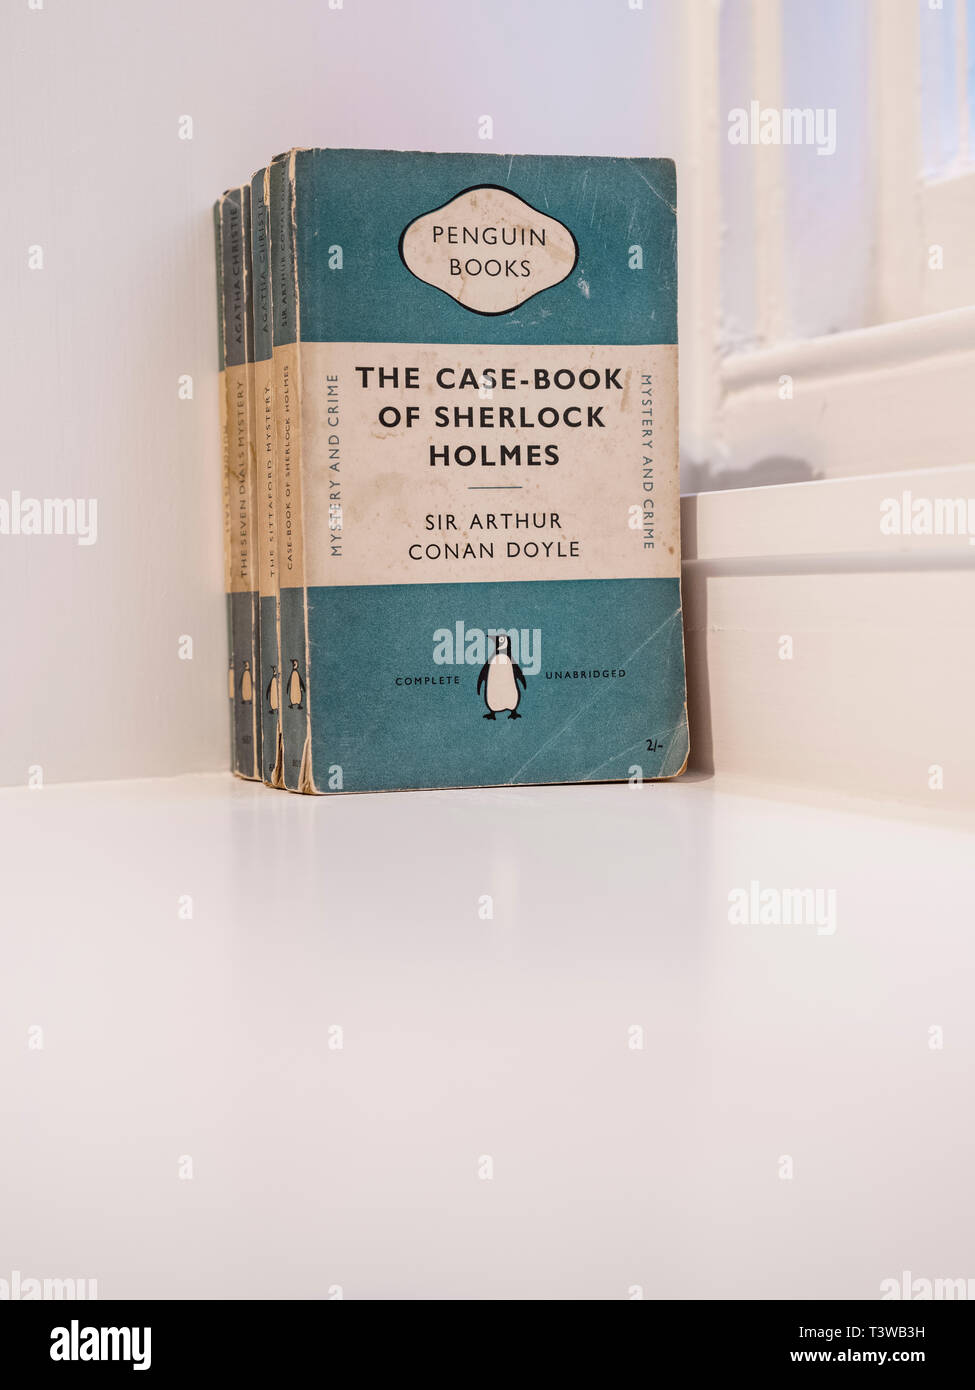 Old copies of The Case-book of Sherlock Holmes by Arthur Conan Doyle published by Penguin sitting on a white shelf. Stock Photo